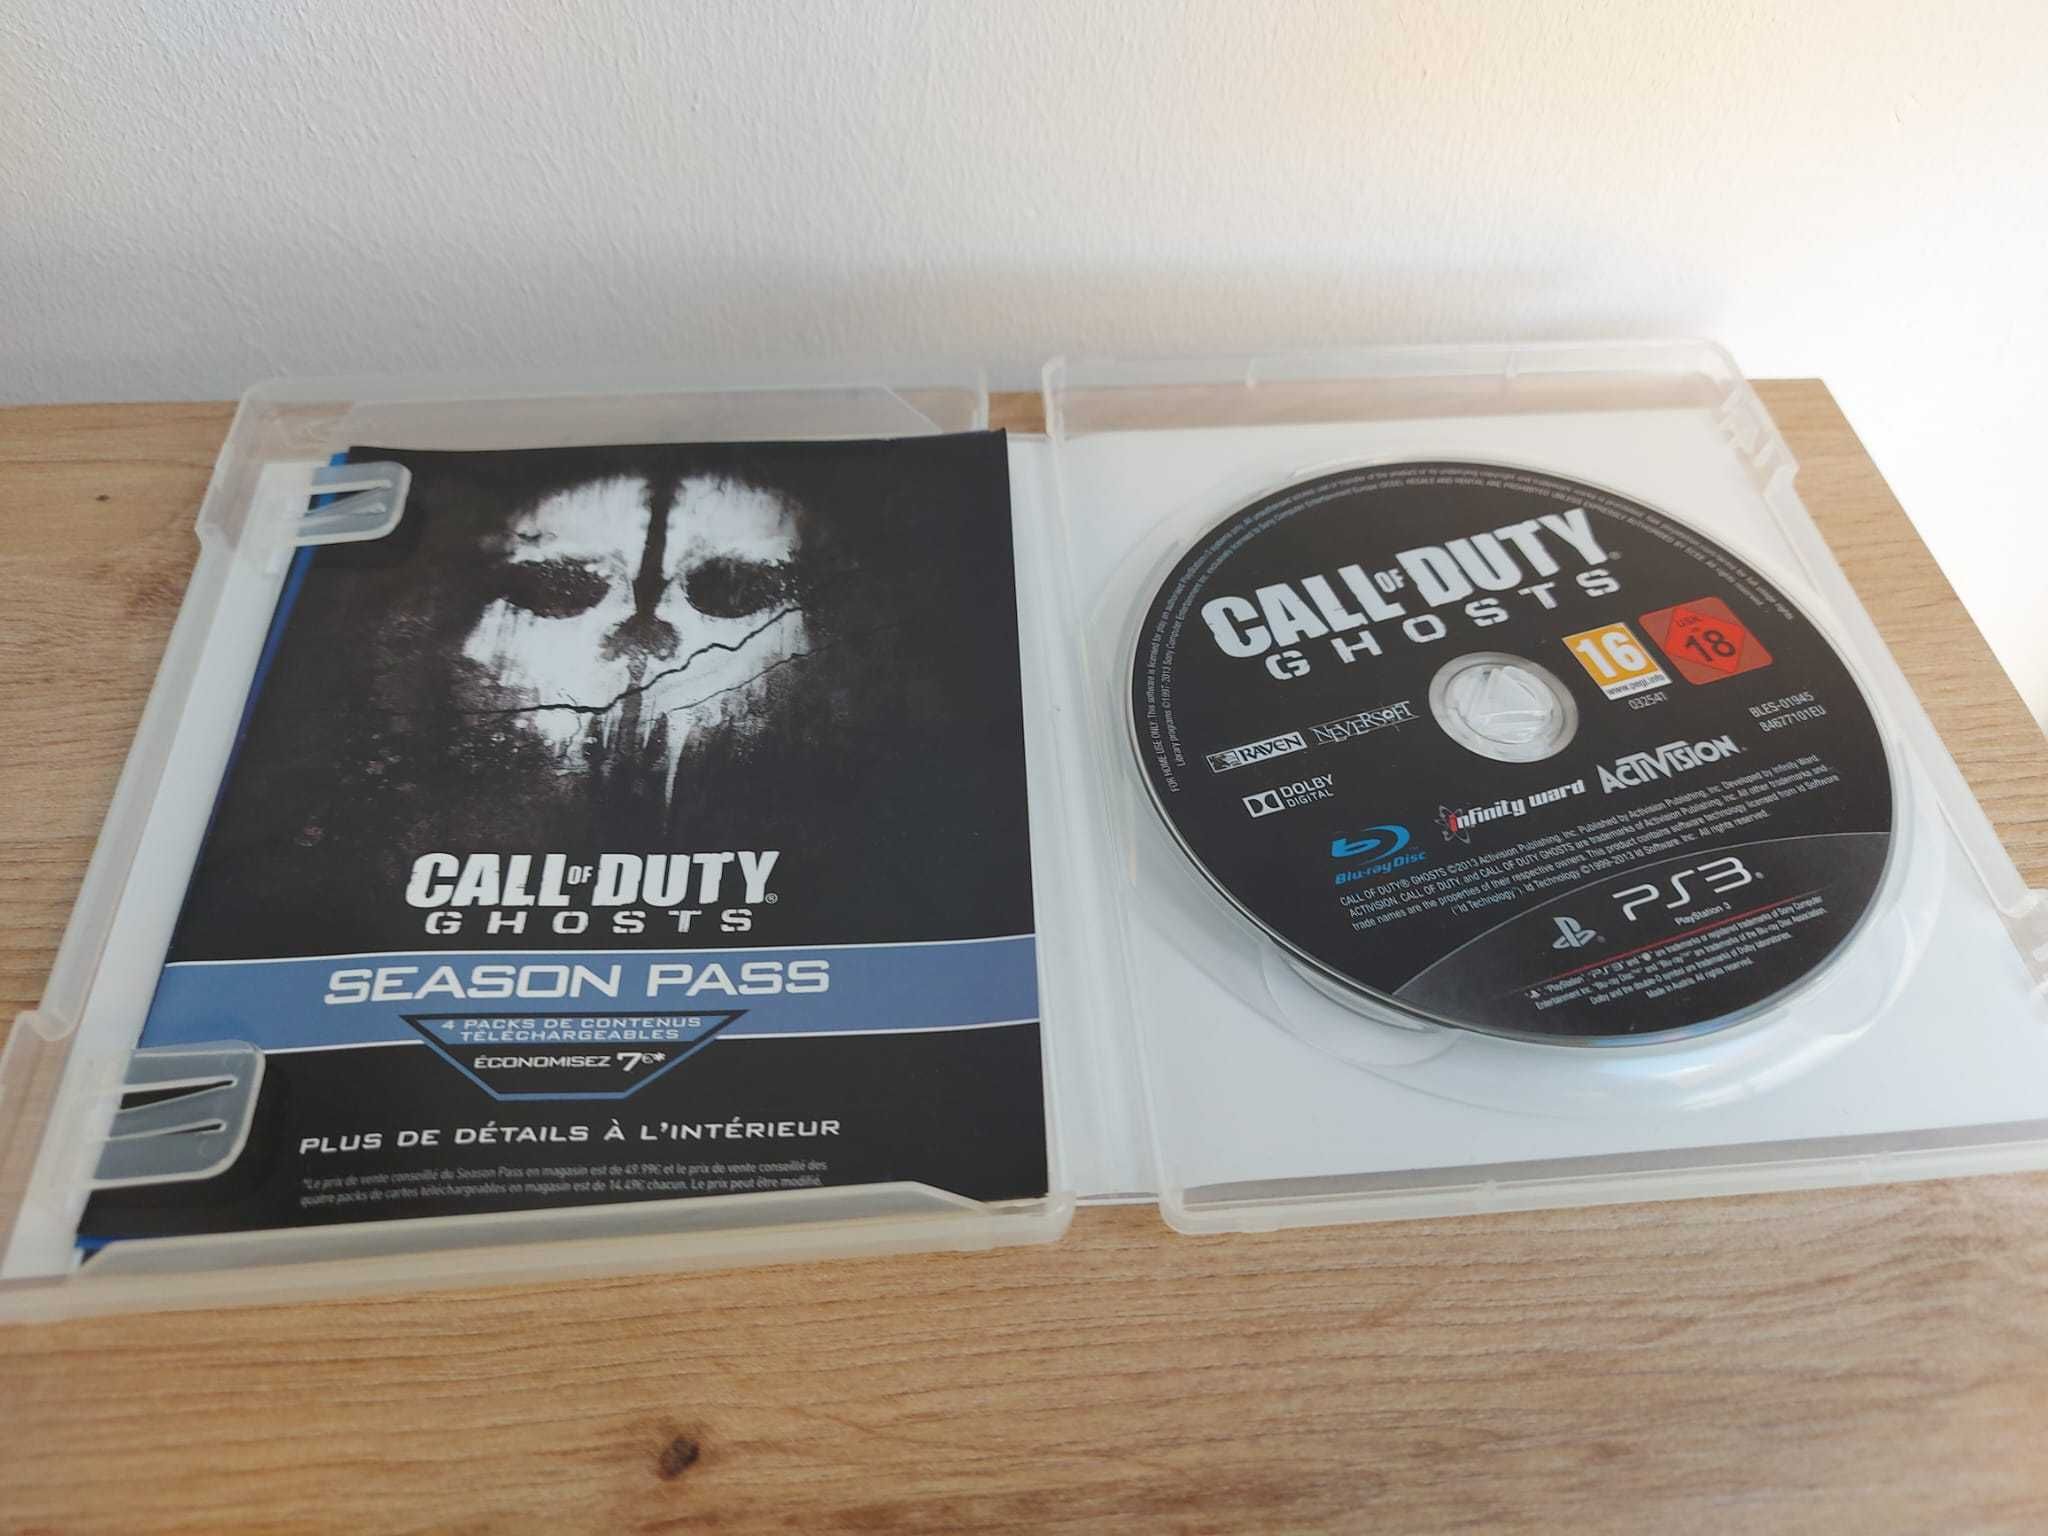 Call Of Duty Ghosts - PS3